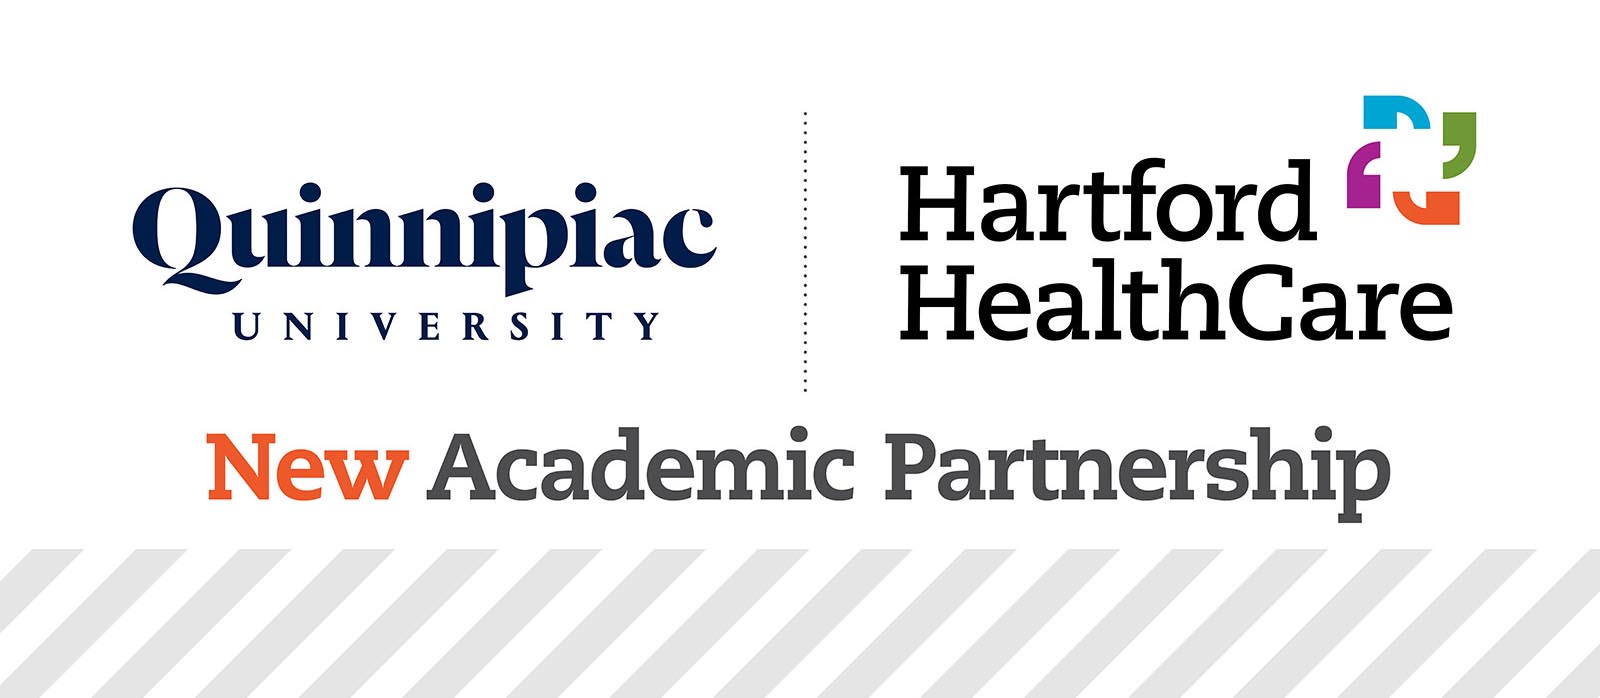 Hartford HealthCare, Quinnipiac Academic Partnership Will Redefine Healthcare Education, Grow State’s Workforce Pipeline and Expand On-Campus Care